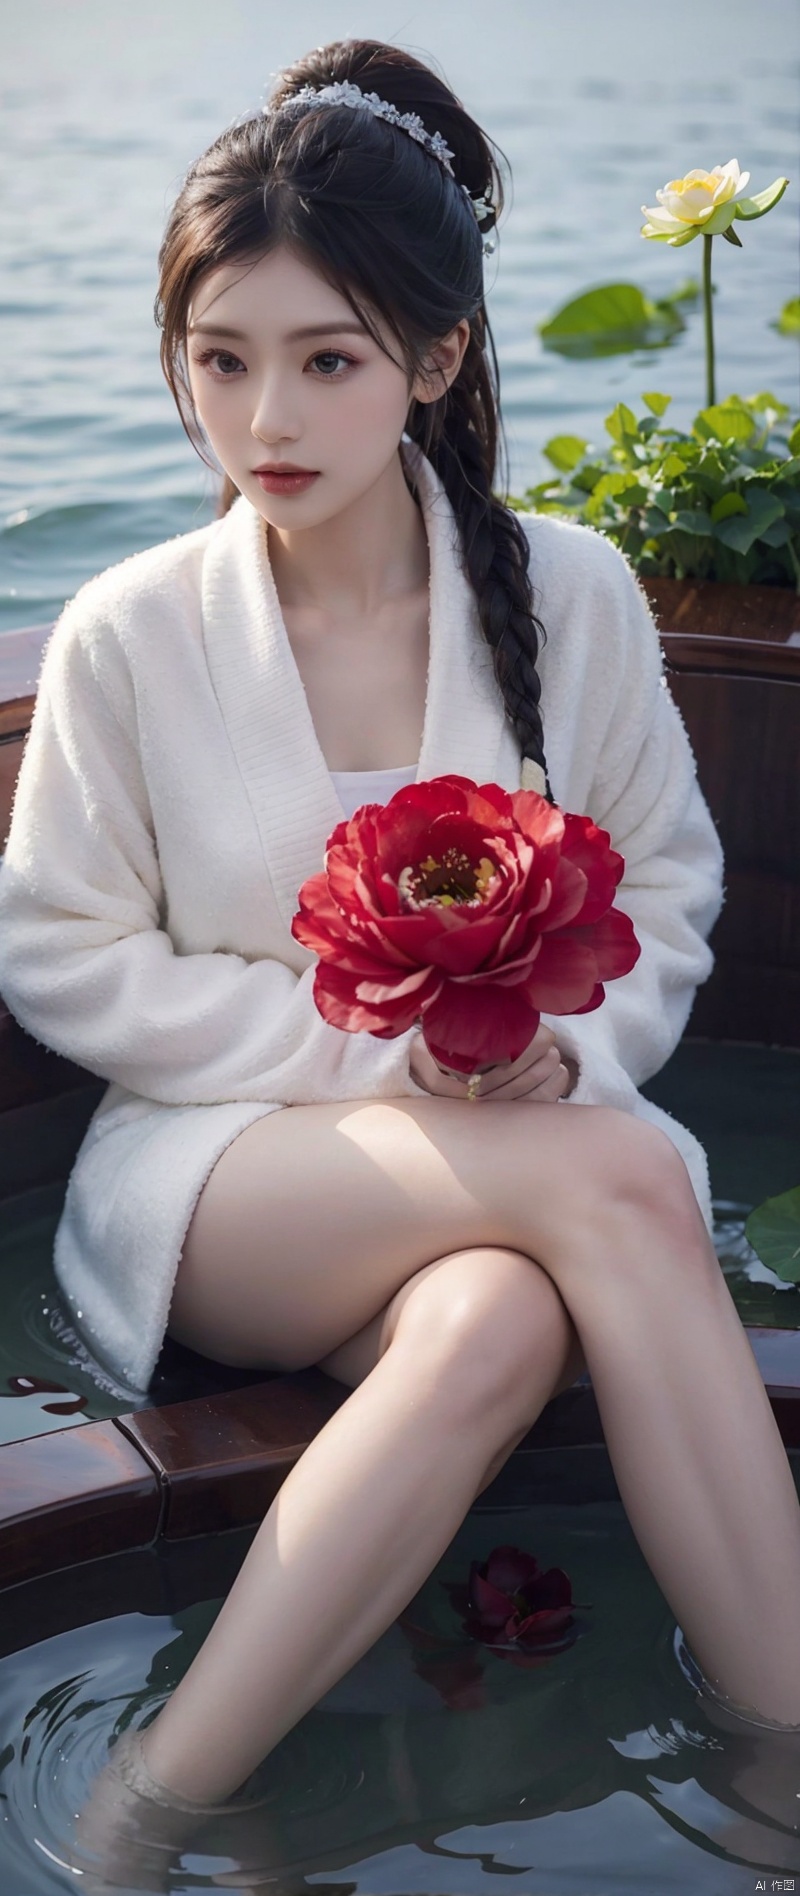  loli,petite,long hair,floating hair,messy hair,1girl,white hair, white jacket,afloat, air bubble, bathtub, beach, berry, blue eyes, blue flower, bouquet, bow, braid, bubble, camellia, caustics, clover, coral, daisy, floral background, flower, food, fruit, hibiscus, horizon, hydrangea, in water, leaf, lily \(flower\), lily of the valley, lily pad, long sleeves, looking at viewer, lotus, ocean, partially submerged, petals on liquid, pink flower,purple flower, rain, red flower, ripples, rose, sailor collar, shallow water, snowflakes, soaking feet, solo, submerged,waves, white rose, yellow flower, jiajingwen